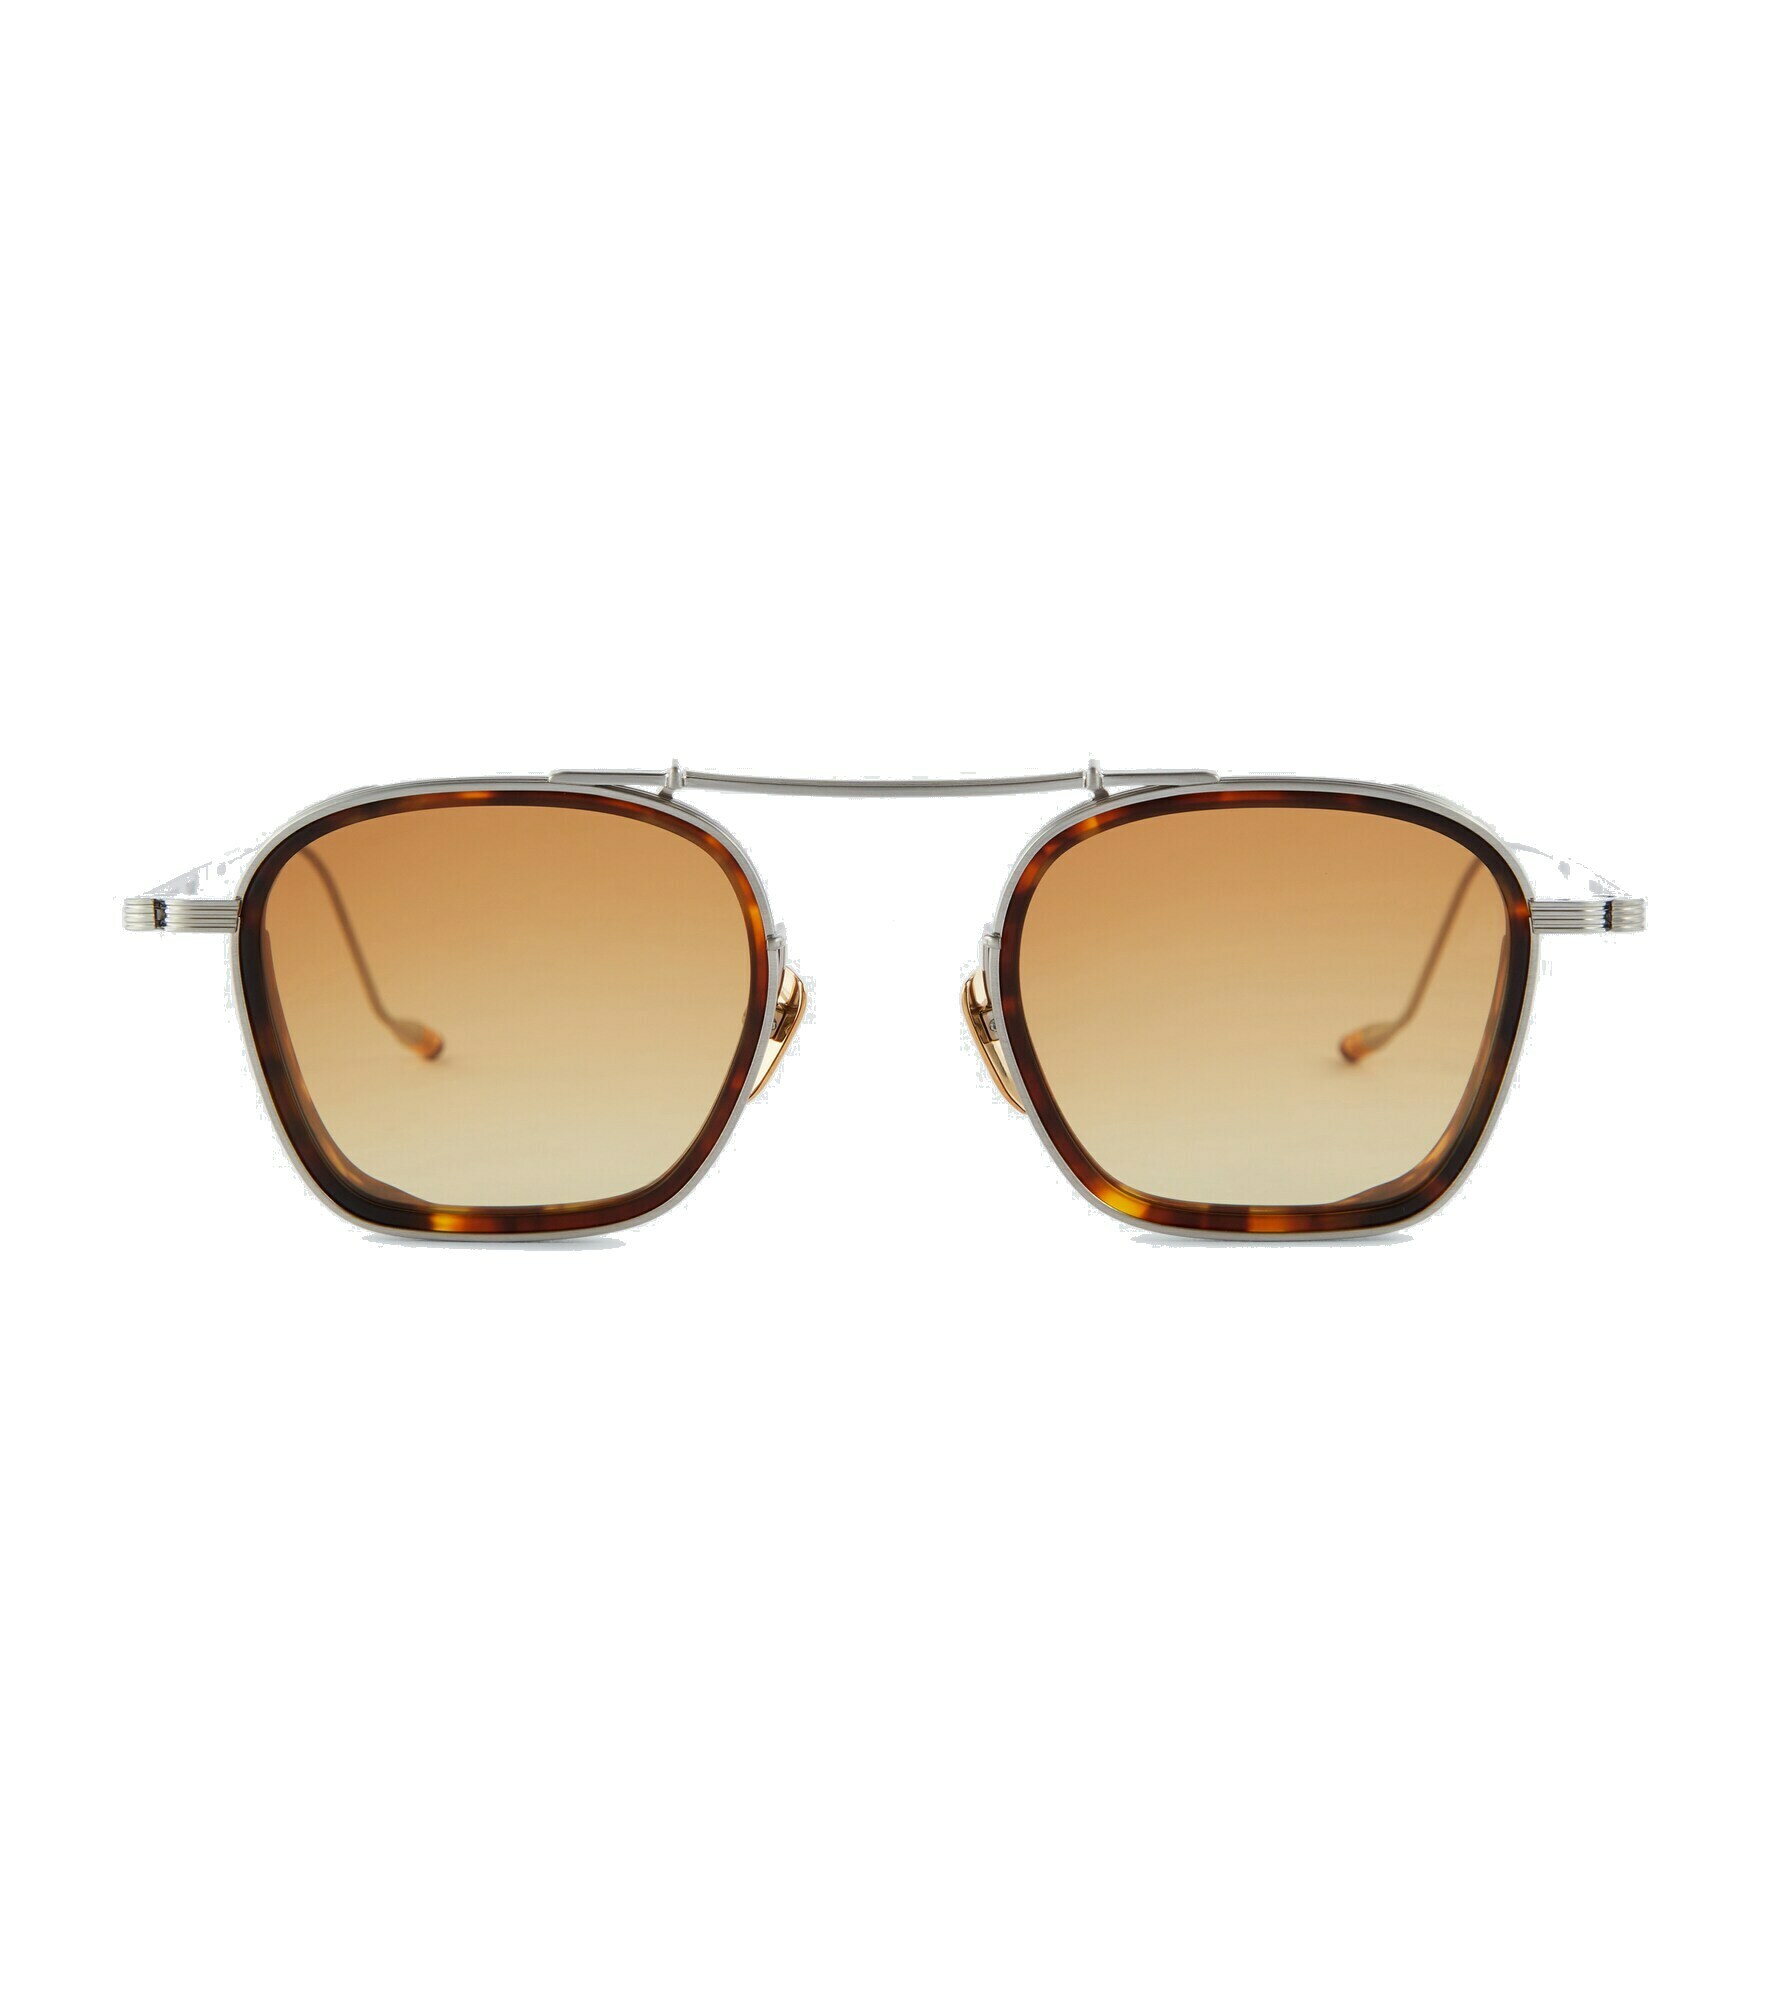 Jacques Marie Mage - Baudelaire 2 browline sunglasses Jacques Marie Mage